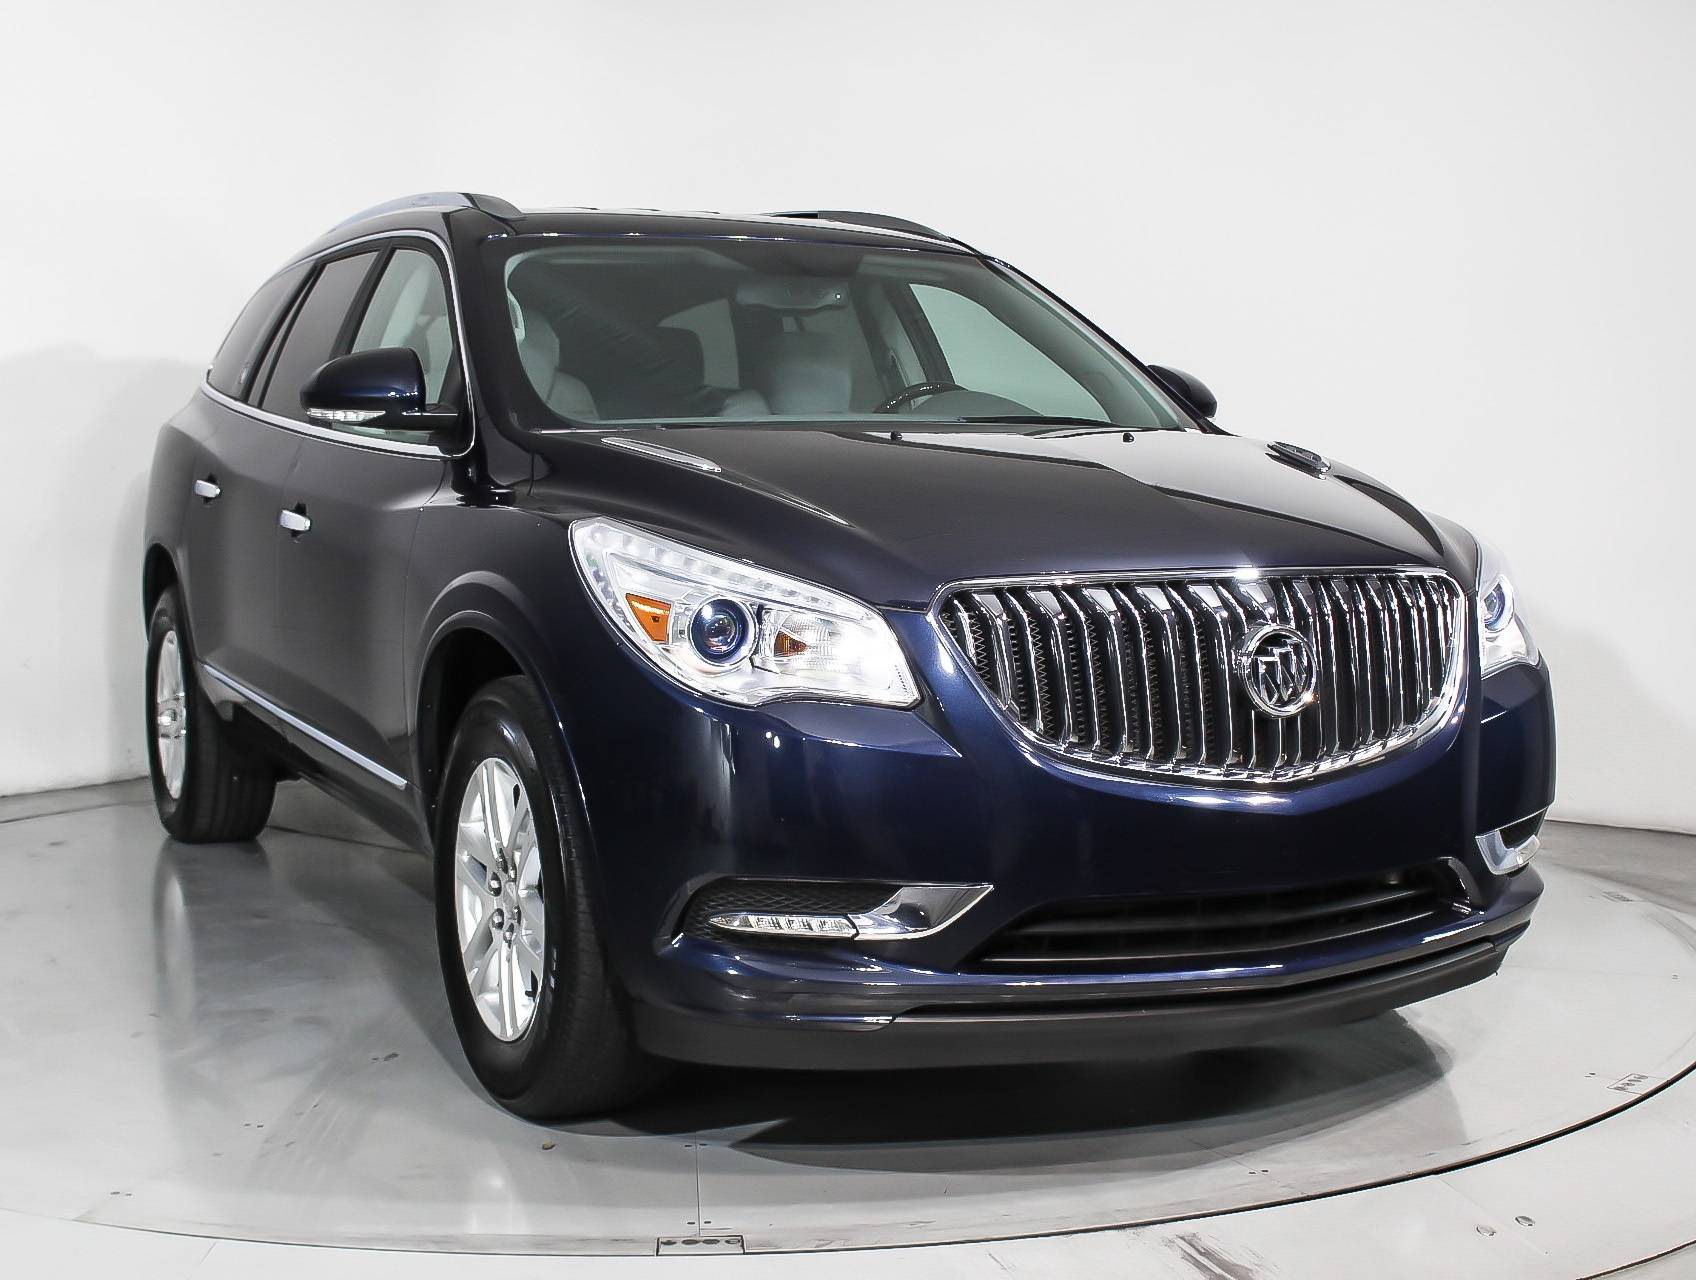 Florida Fine Cars - Used BUICK ENCLAVE 2015 HOLLYWOOD CONVENIENCE